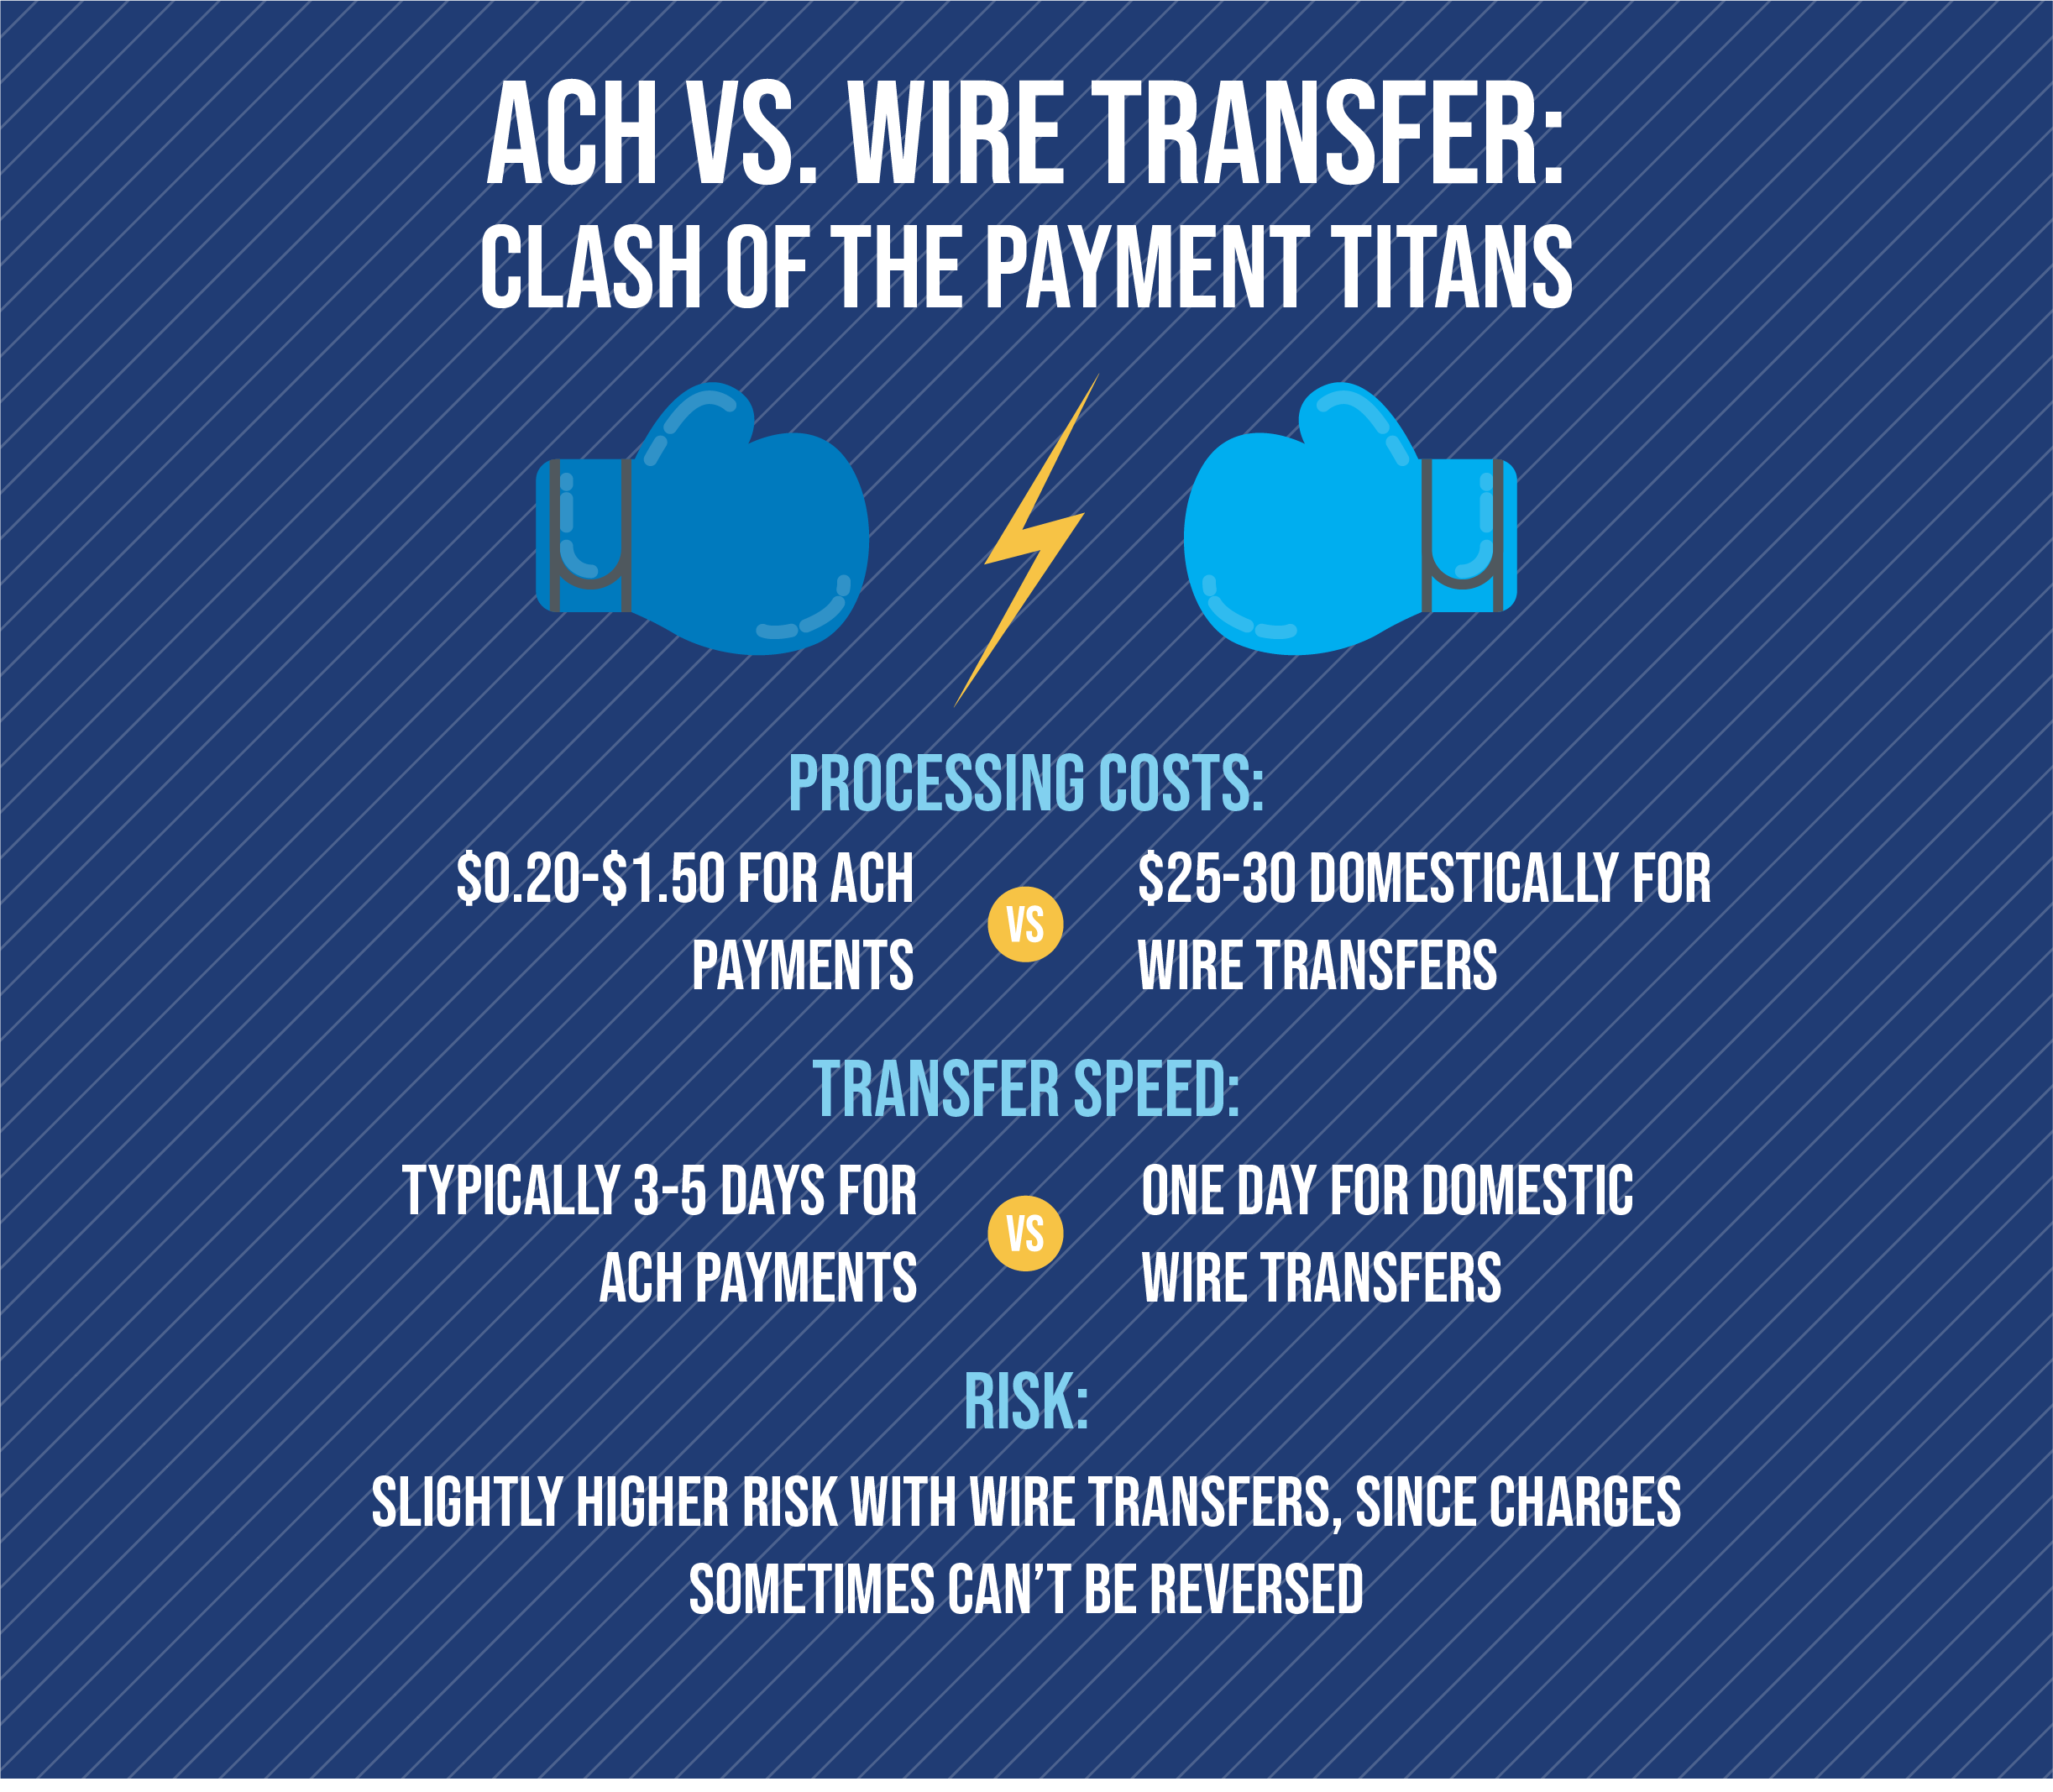 ACH Payments vs. Wire Transfers